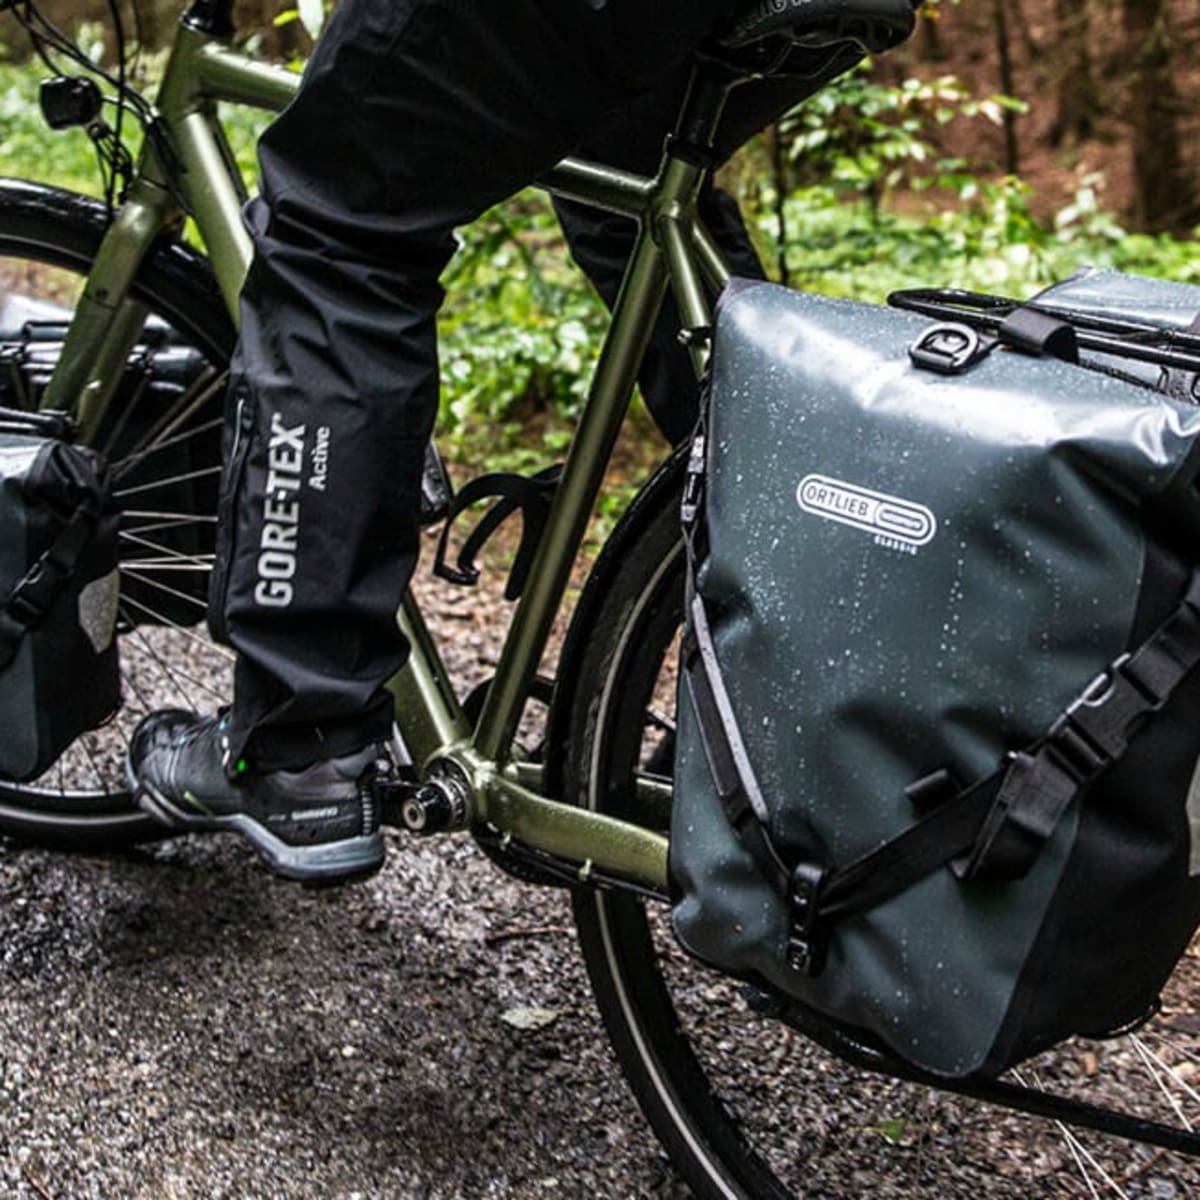 consensus hart Baleinwalvis The Best Bike Panniers to Haul Your Gear While Riding - Men's Journal